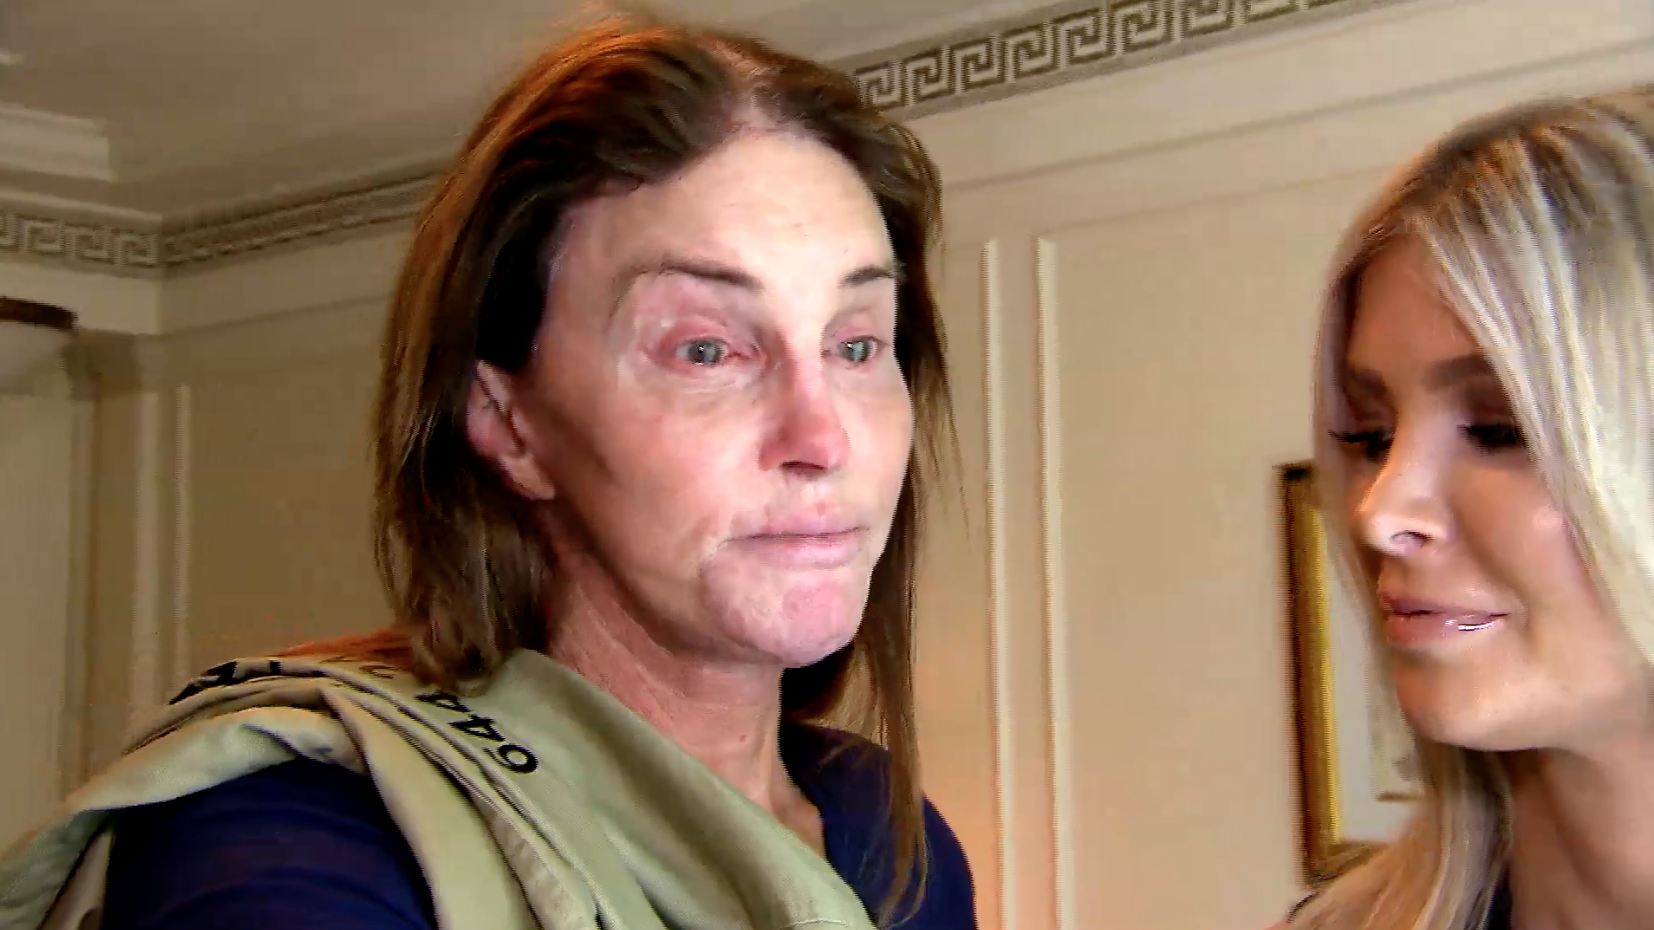 Caitlyn Jenner gets emotional as she finally speaks to famous daughter